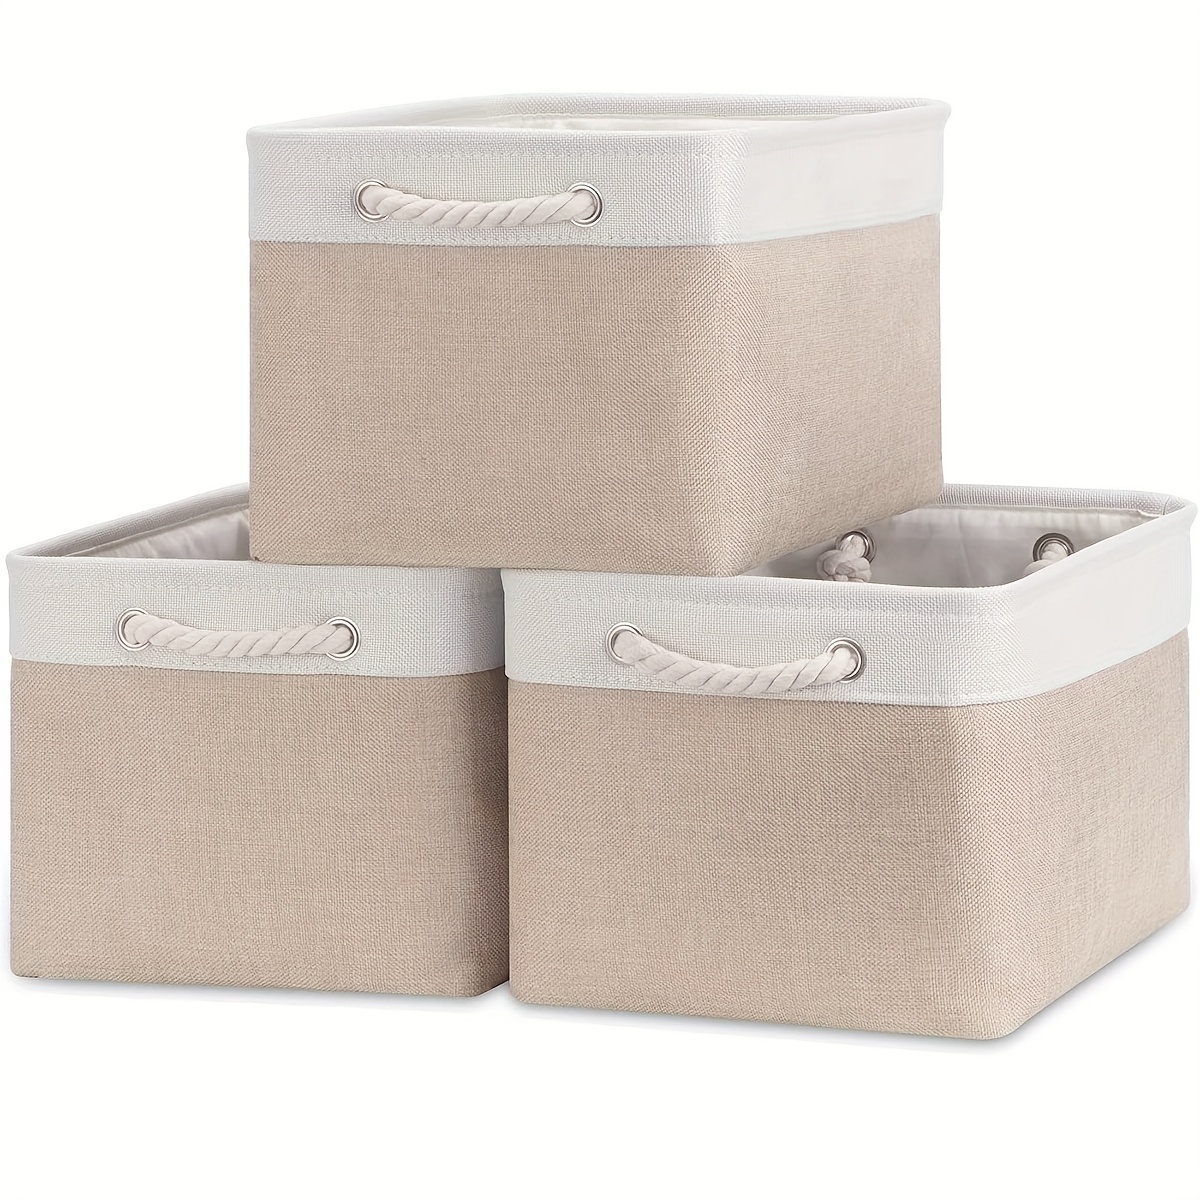 Collapsible Storage Tub Kit with Lids - 30L - Ironman 4x4 America